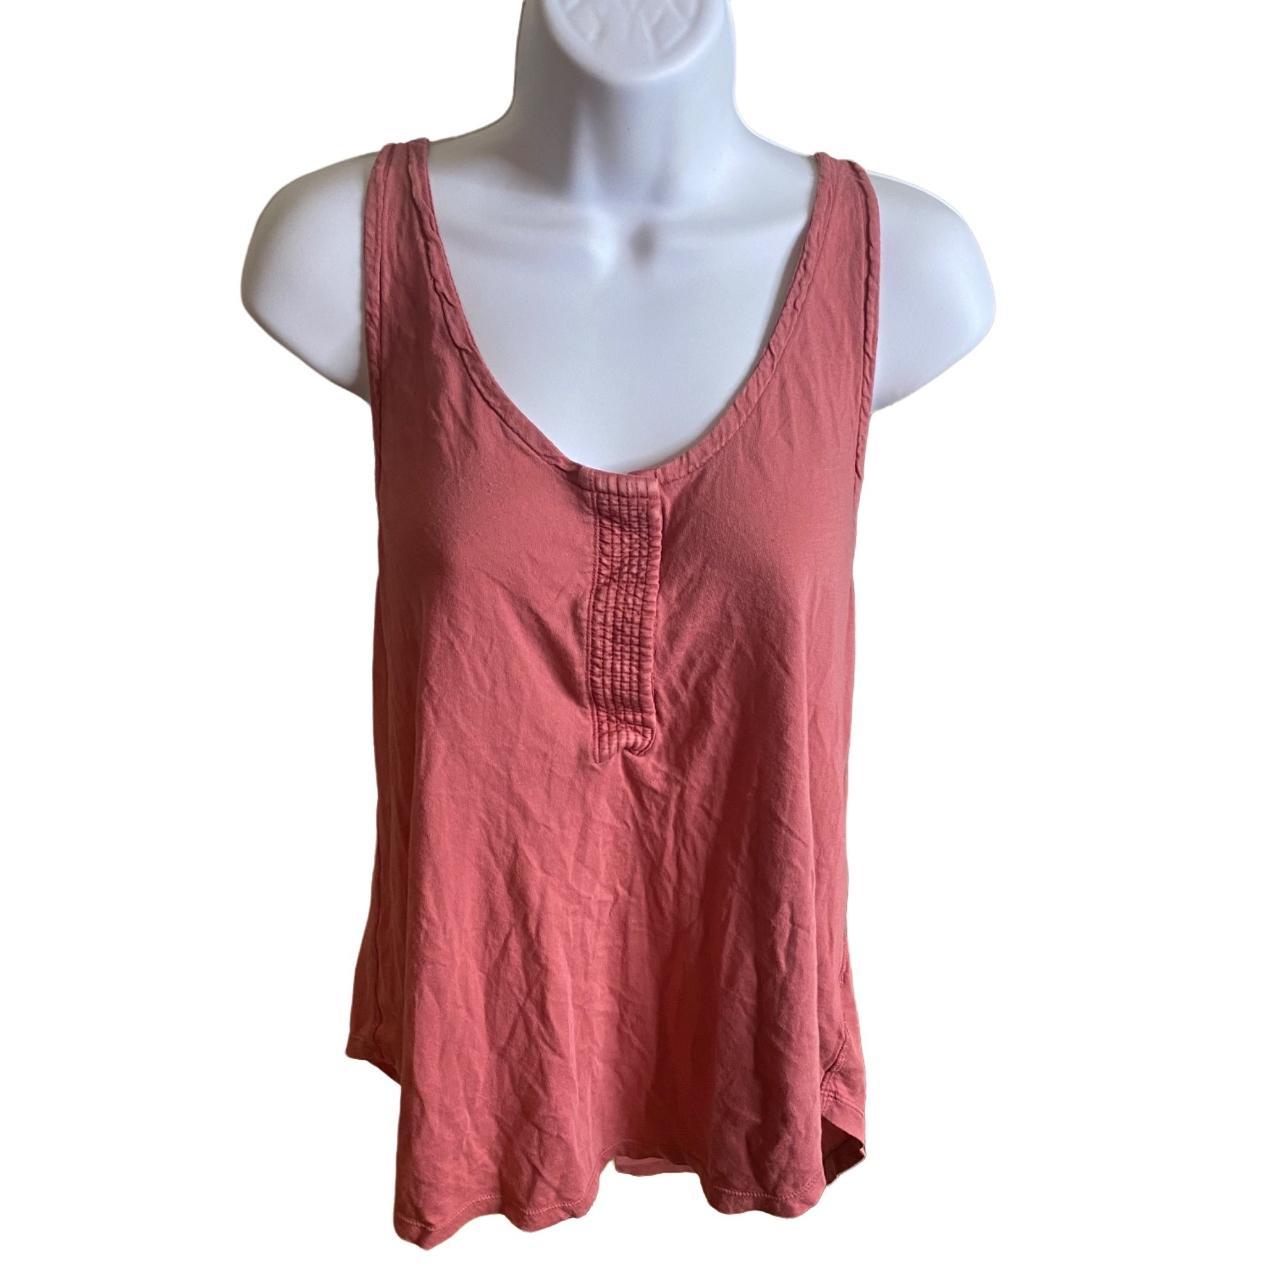 Product Image 1 - KENJI TANK

DISTRESSED RED

100% COTTON

SIZE L

HIGH